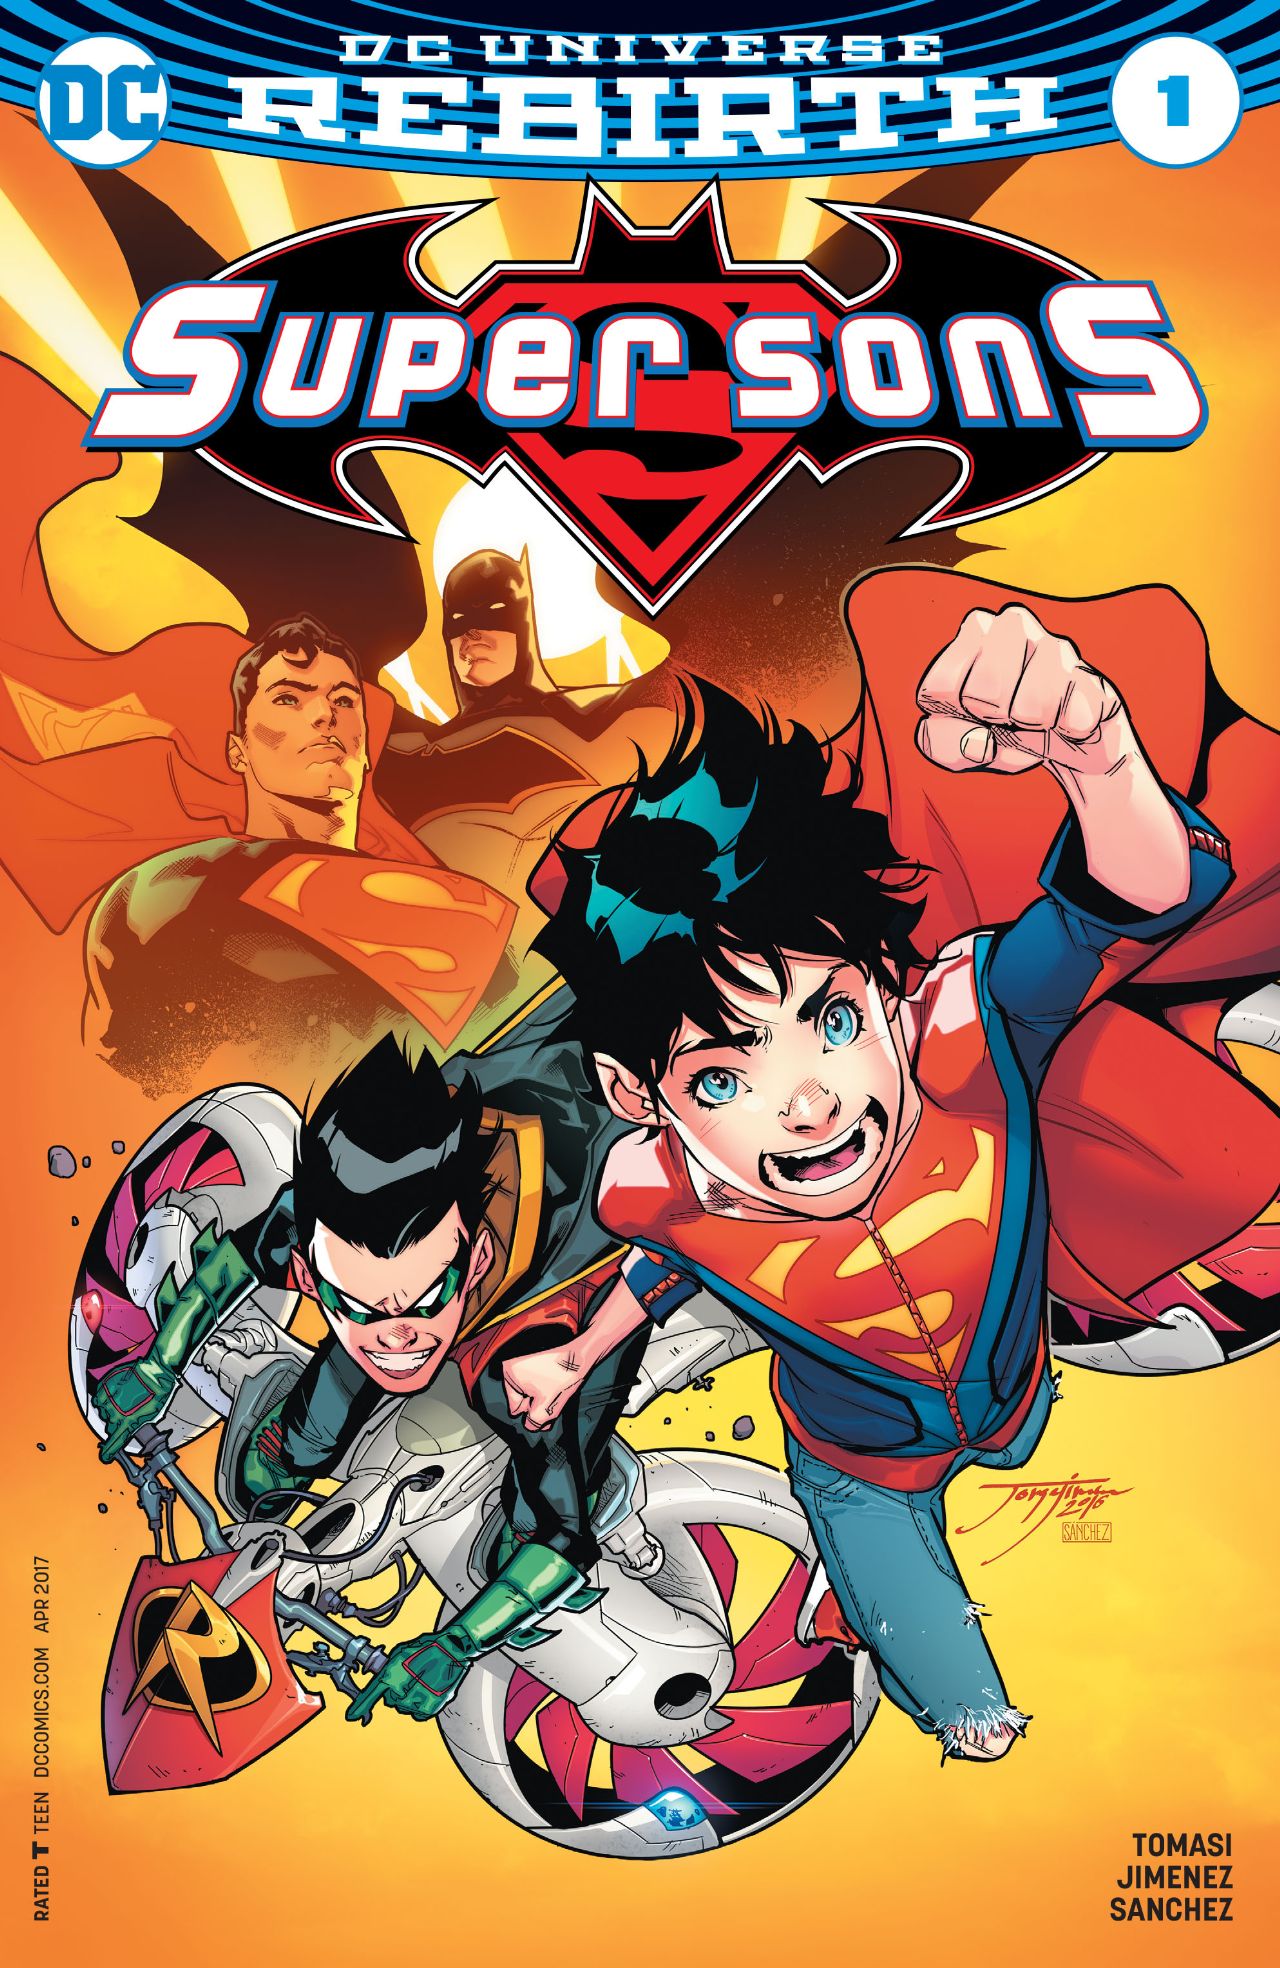 Super Sons #1 Review